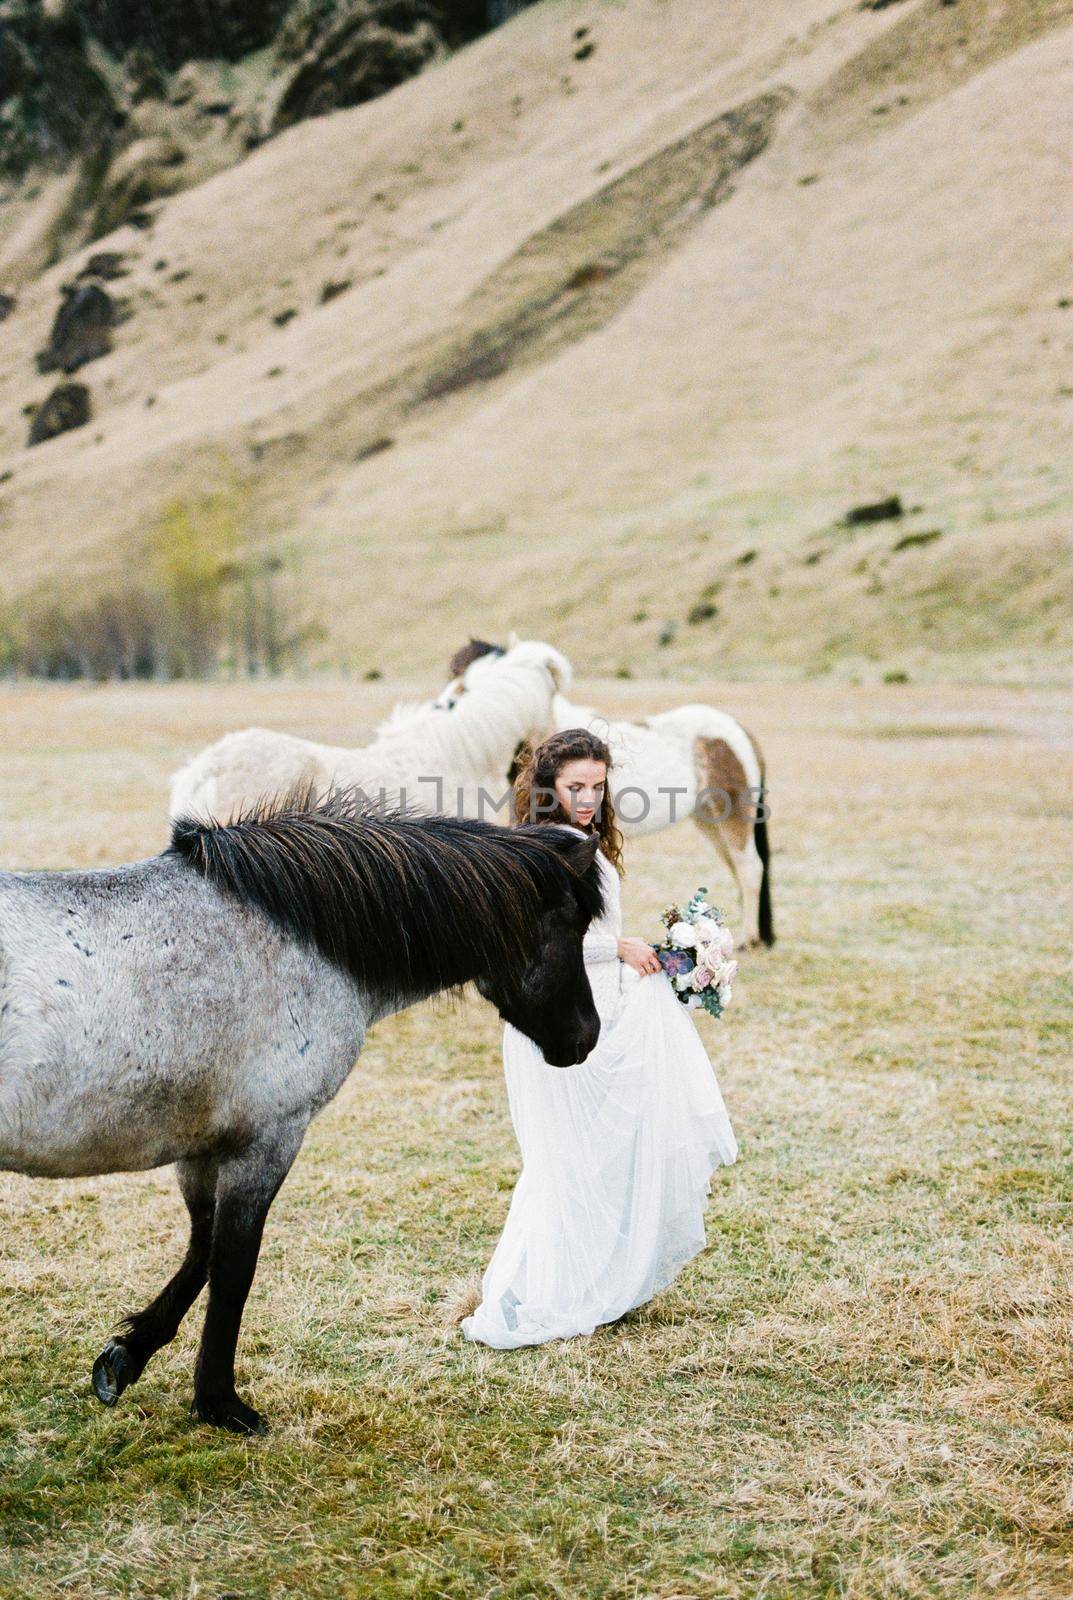 Bride in a white dress with a bouquet stands among the horses in the pasture by Nadtochiy